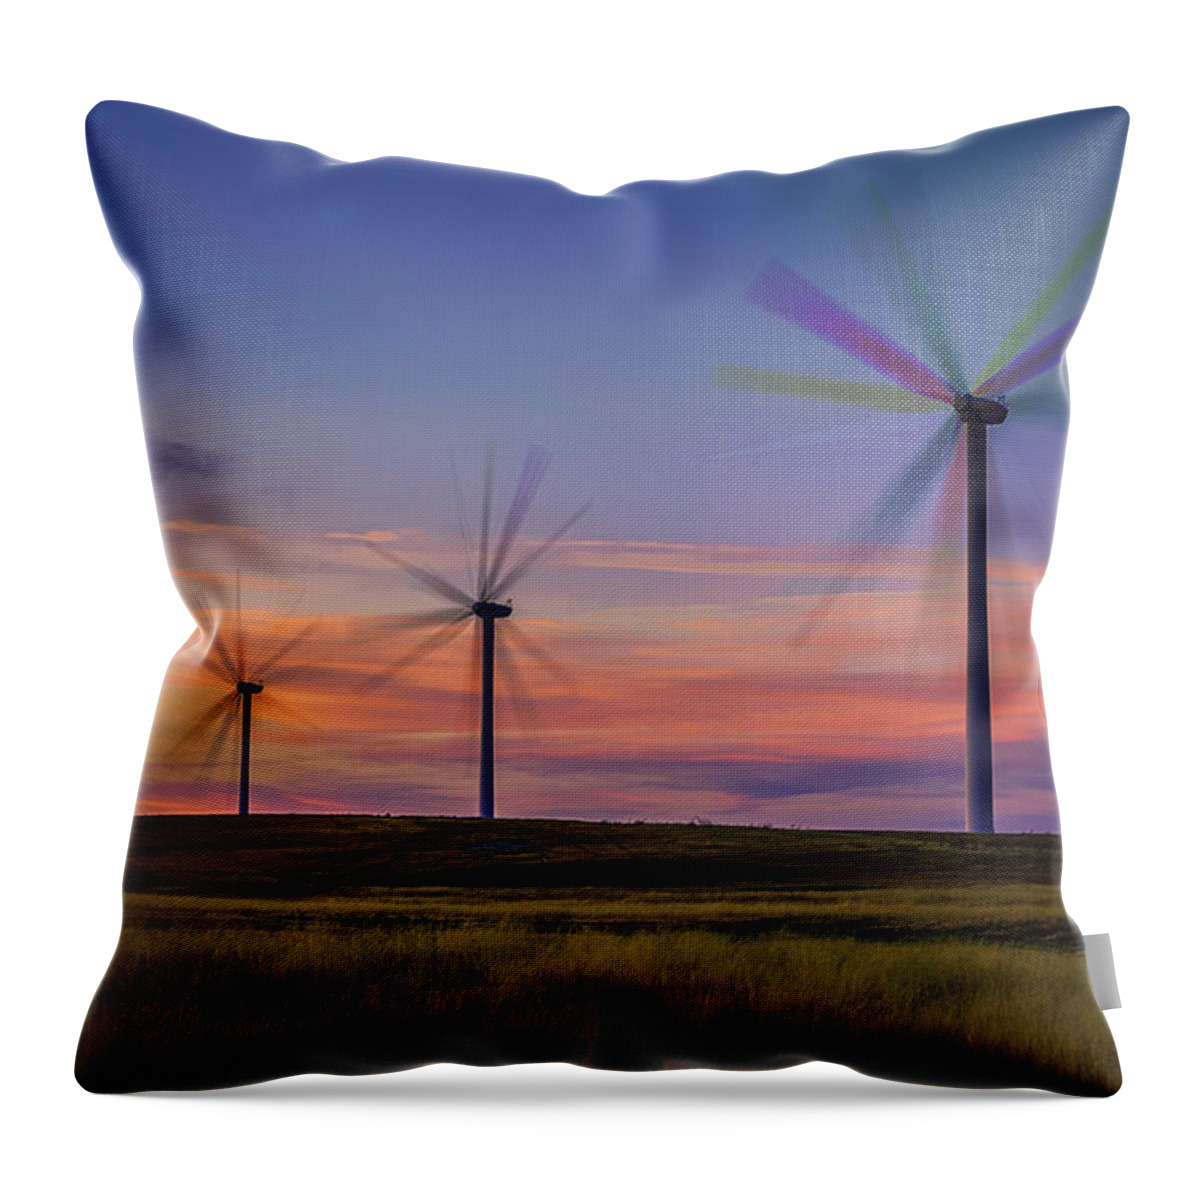 Anti-aging Throw Pillow featuring the photograph Rainbow Fans by Don Hoekwater Photography